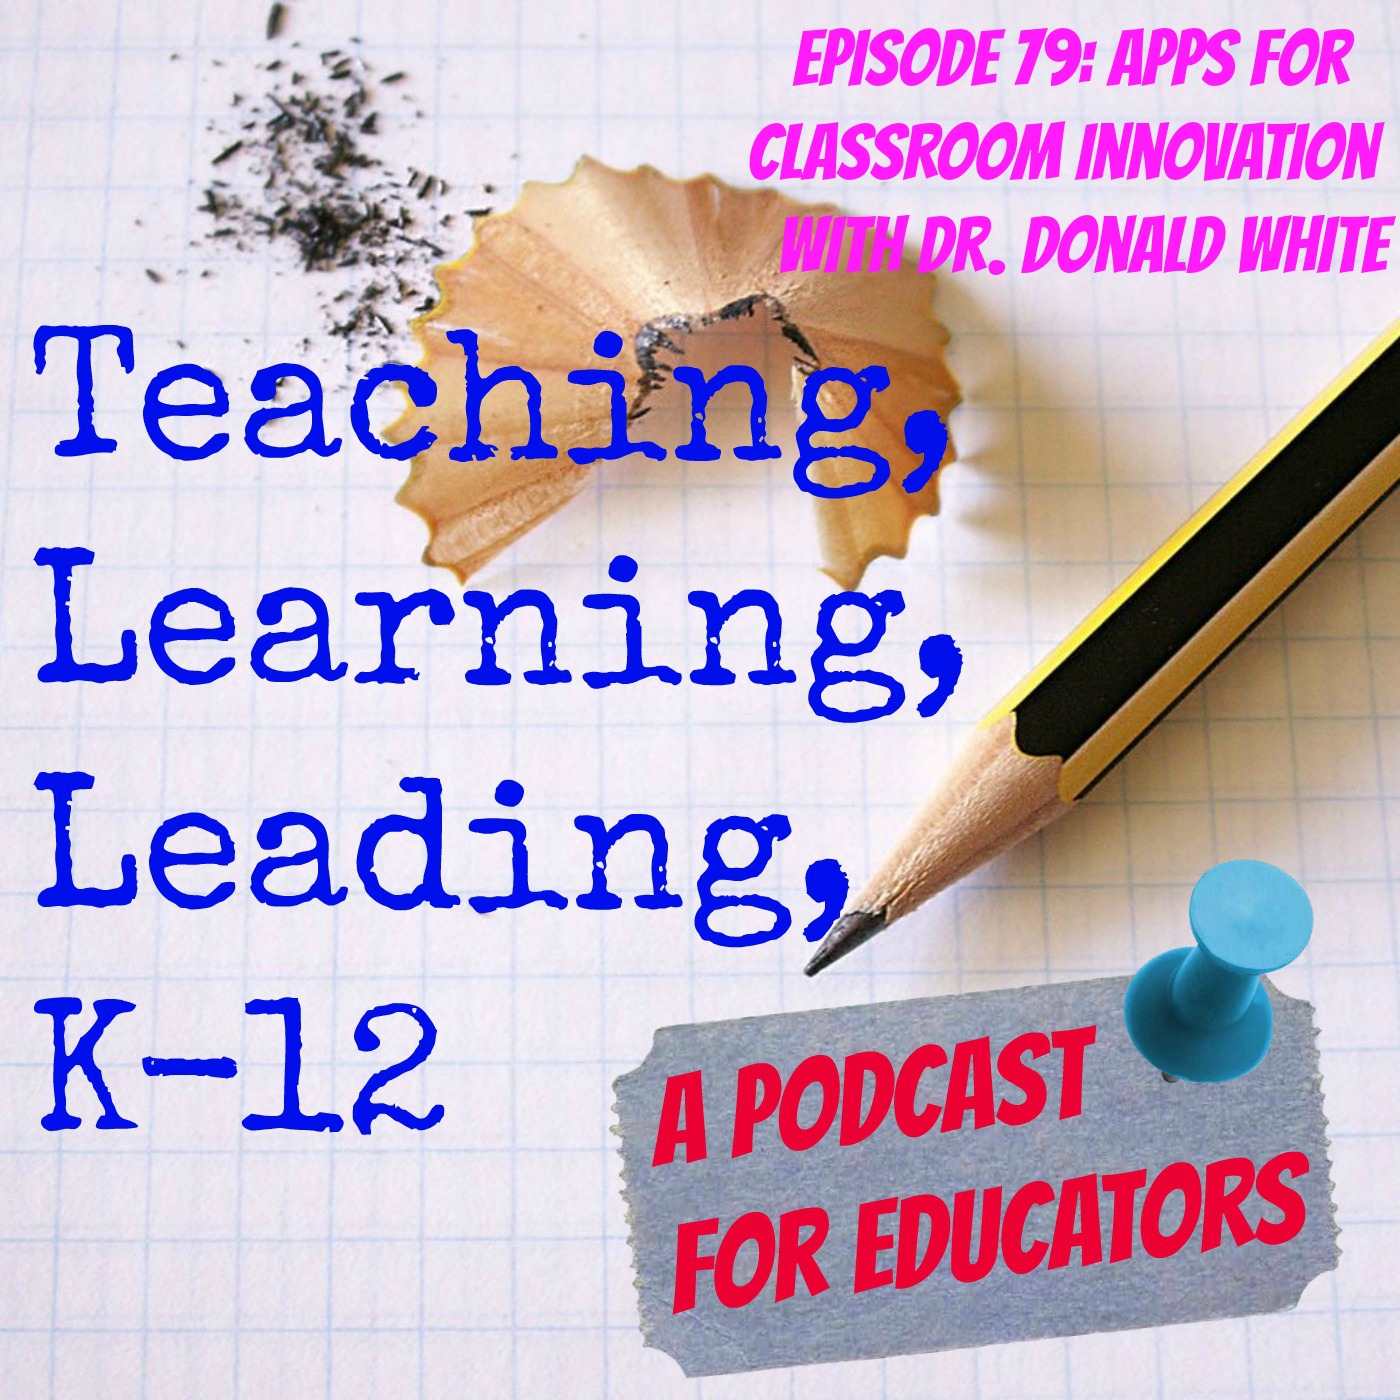 Episode 79: Apps for Classroom Innovation with Dr. Donald White